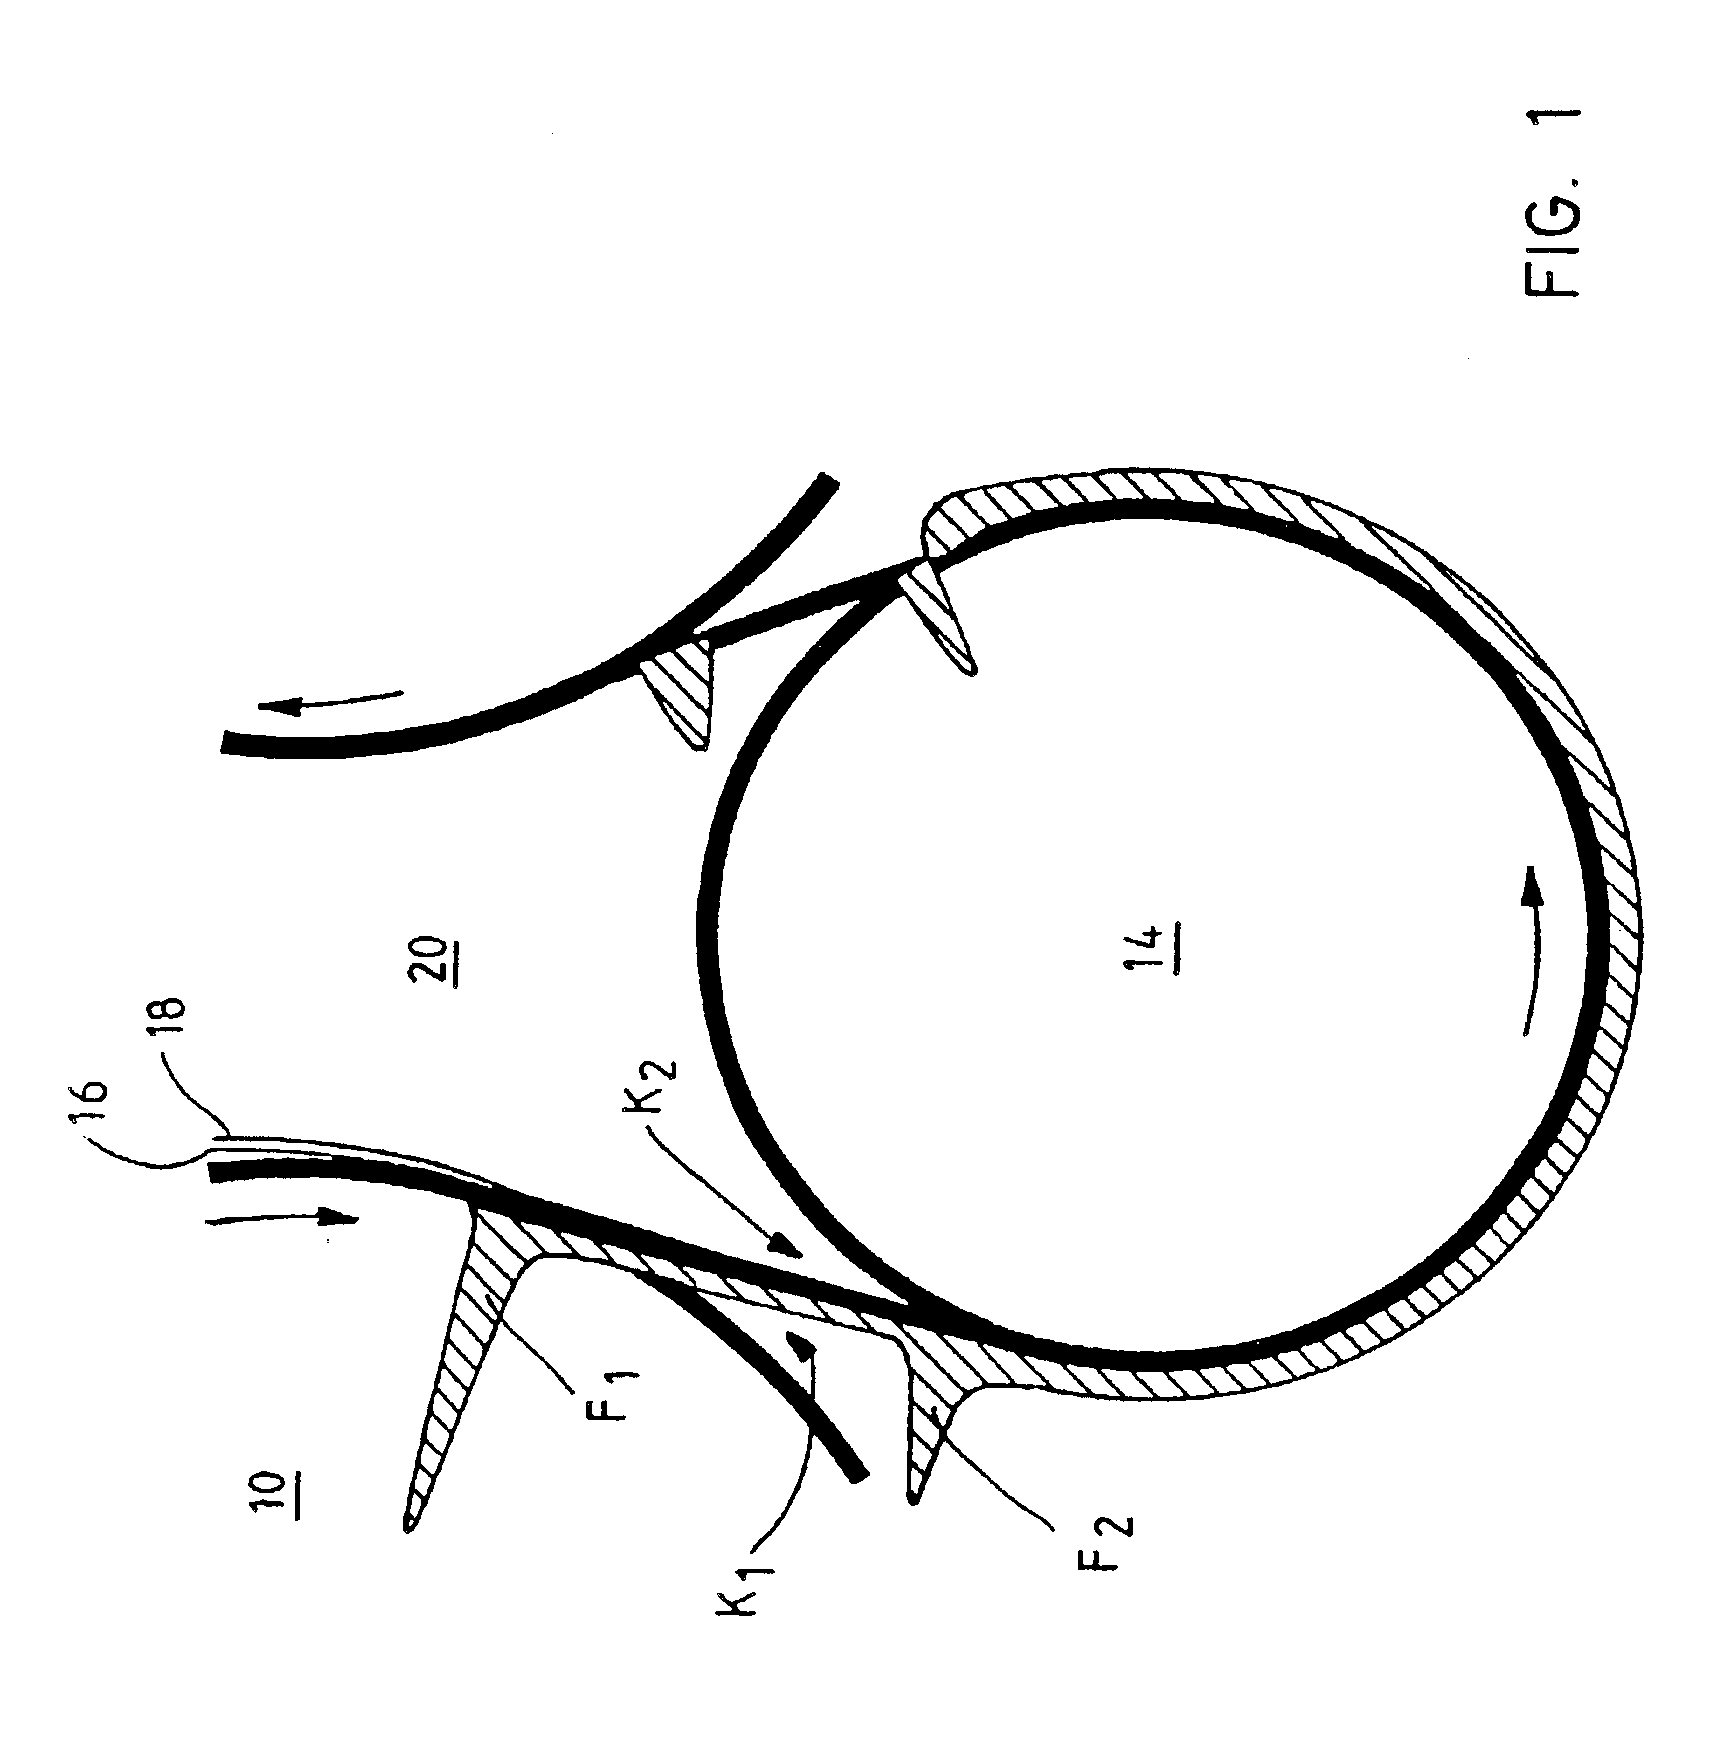 Method and apparatus in the drying section of a paper machine or the like